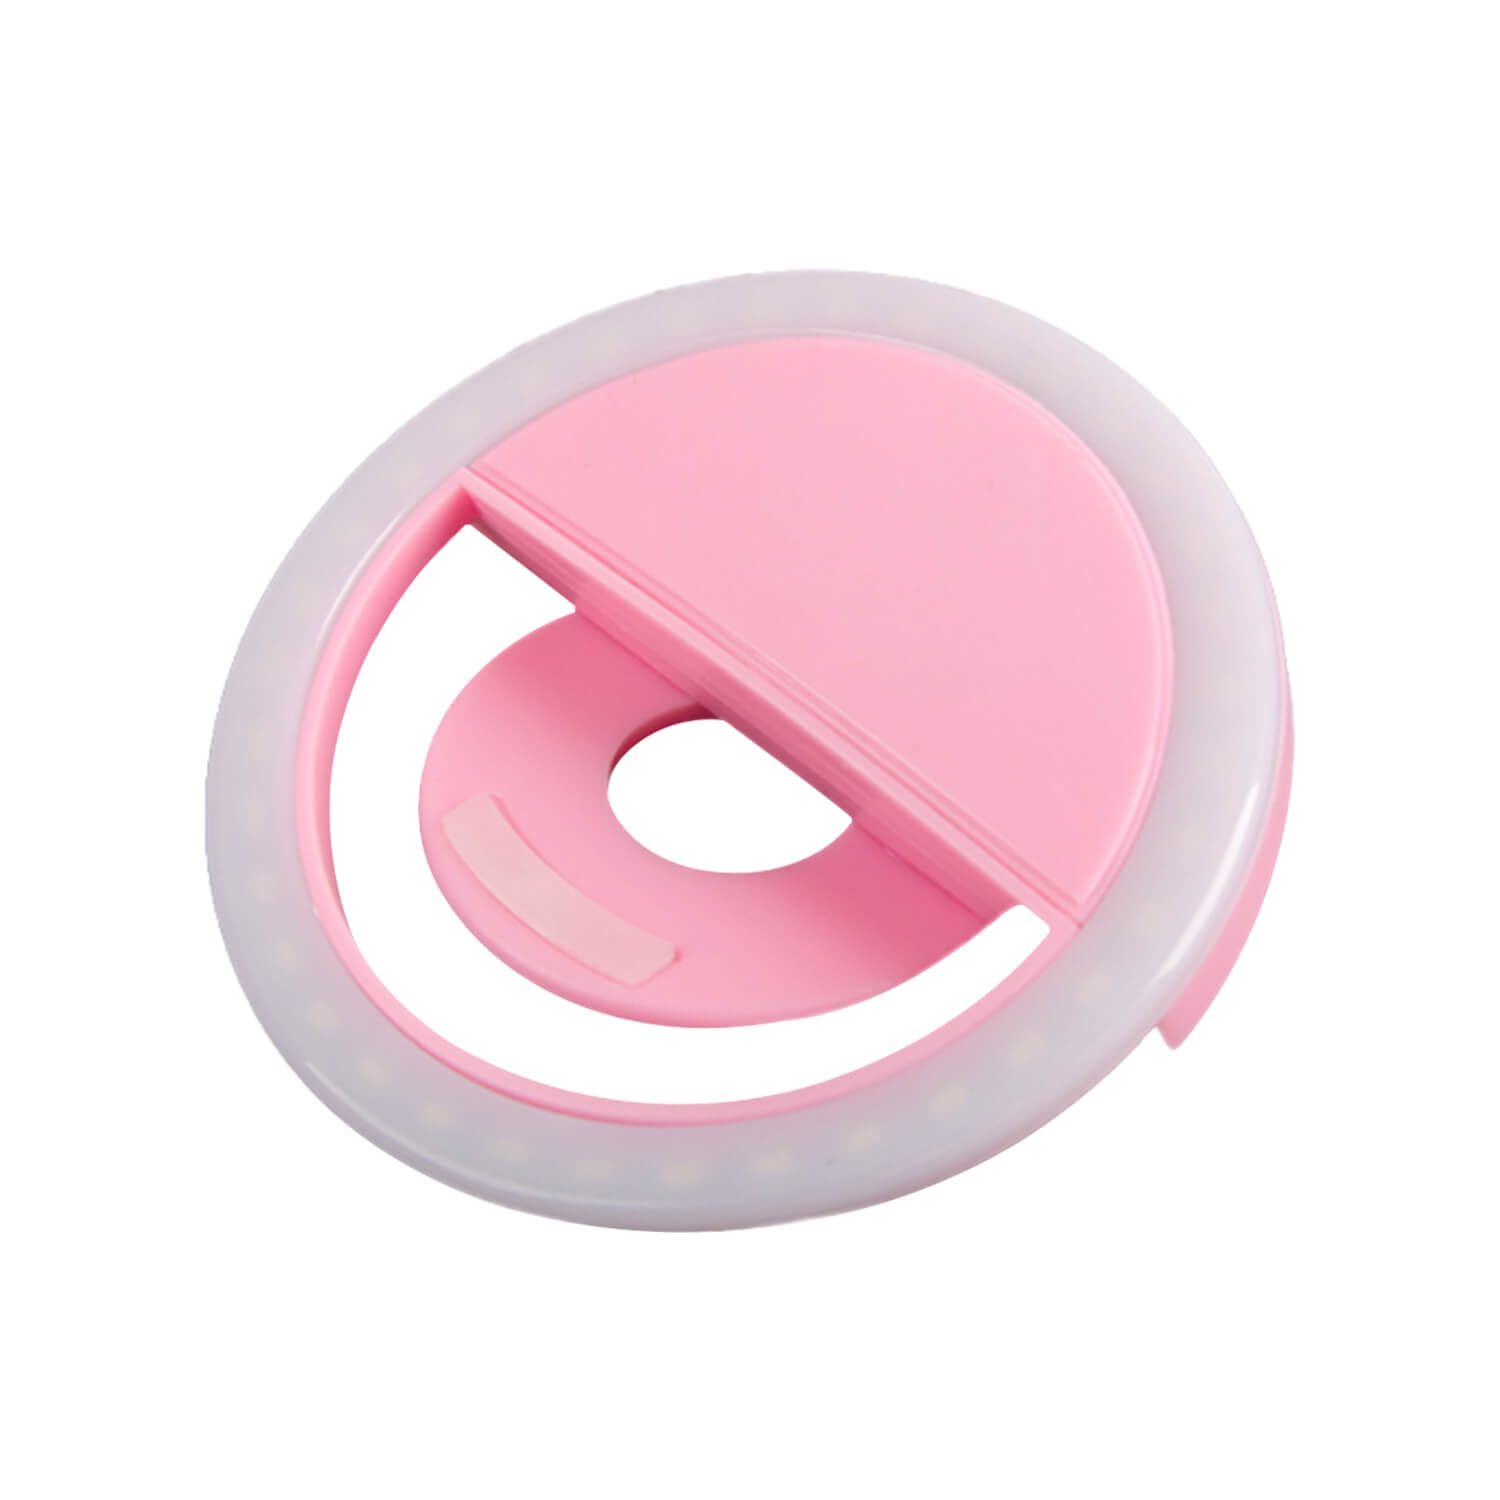 Rechargeable Selfie LED Light Flash Fill Ring Clip Camera Samsung iPhone Pink